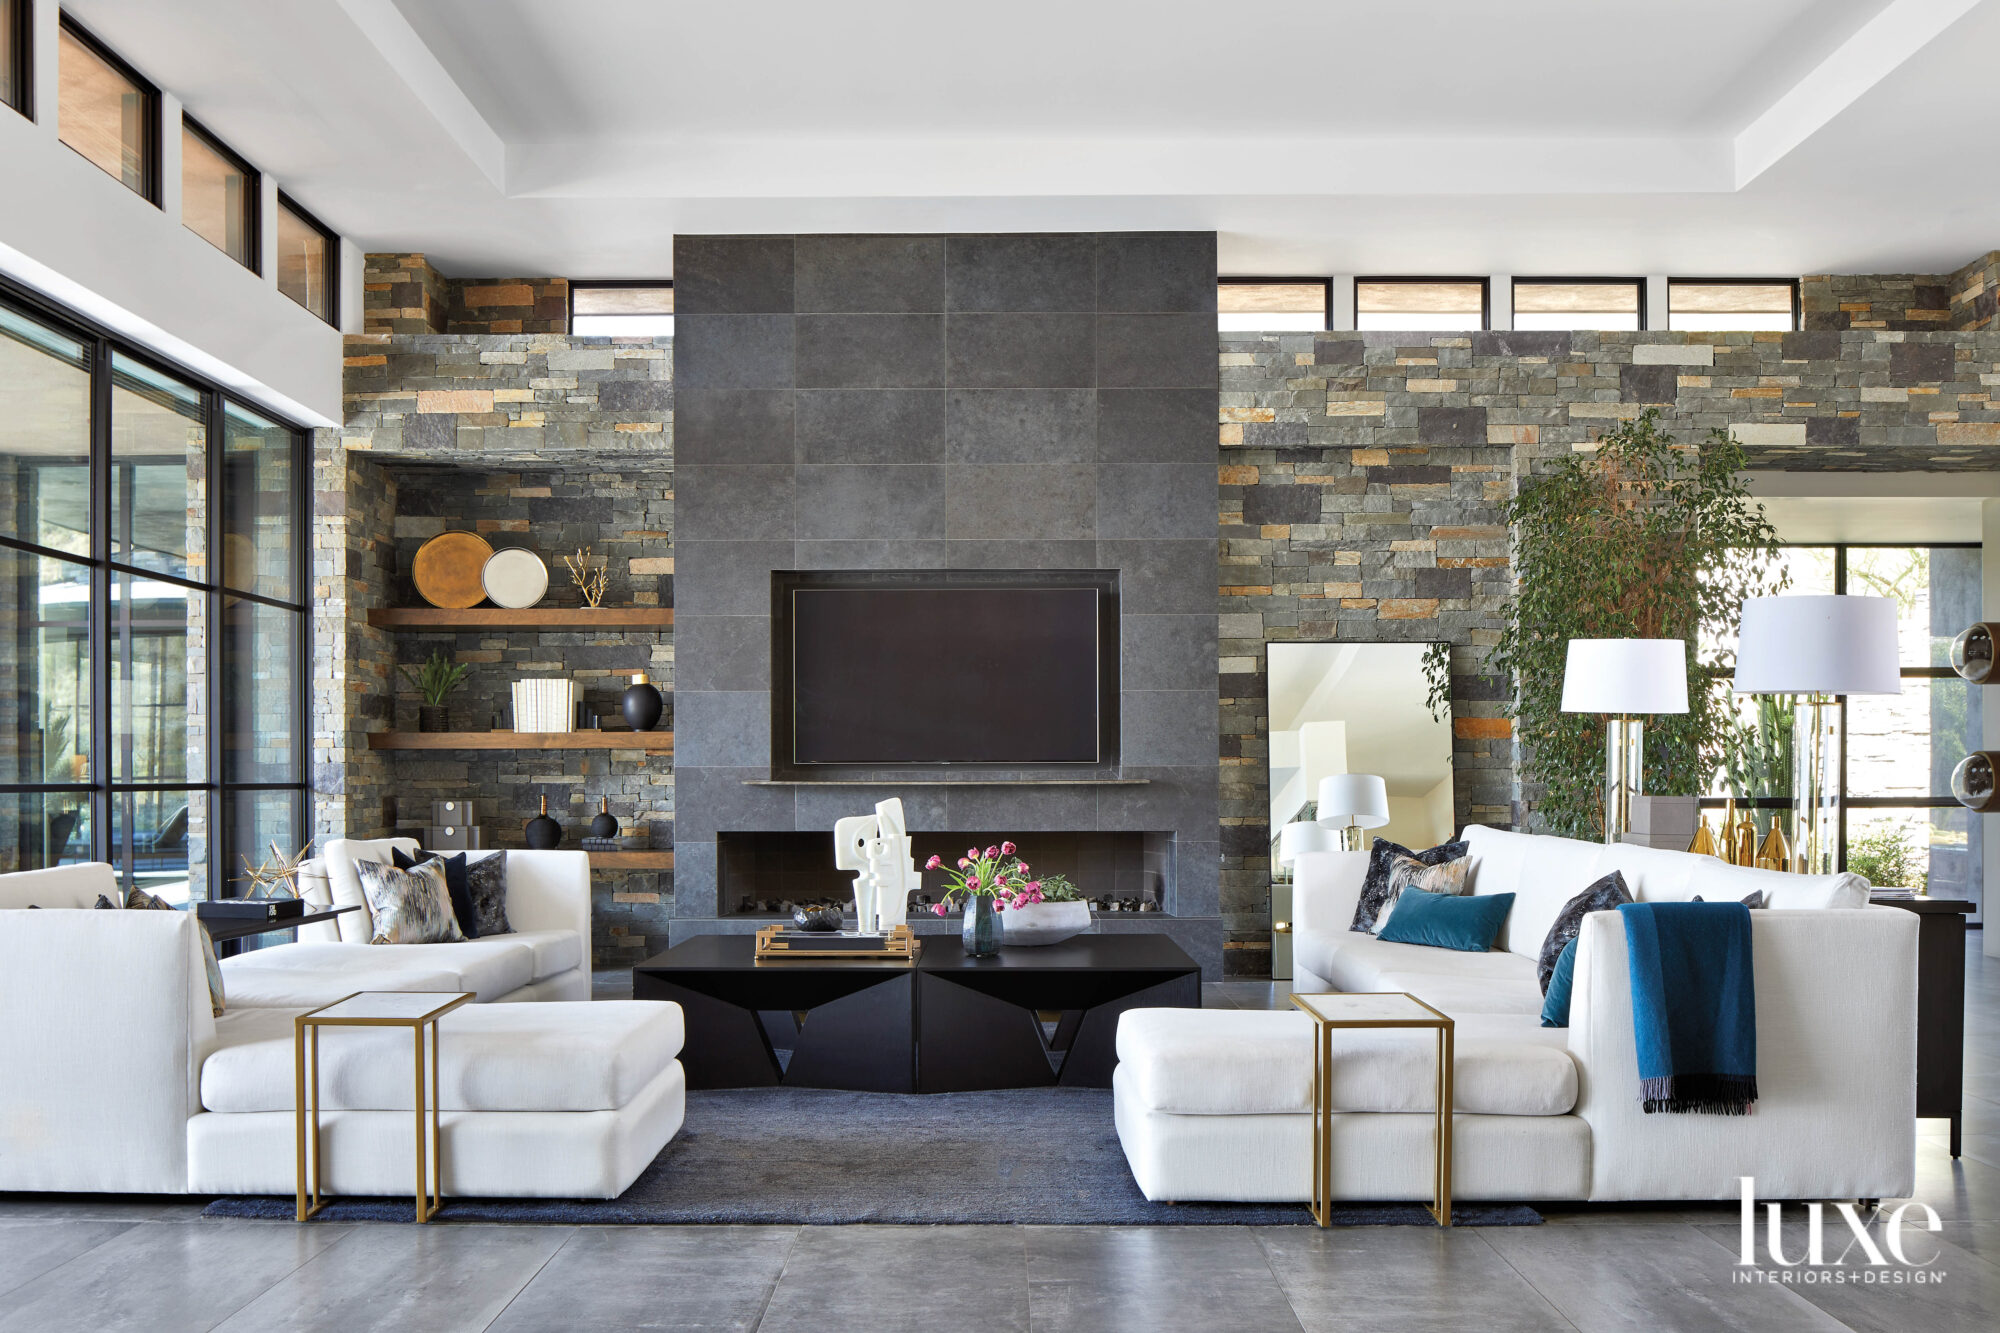 A living area with white couches and a dark stone fireplace.